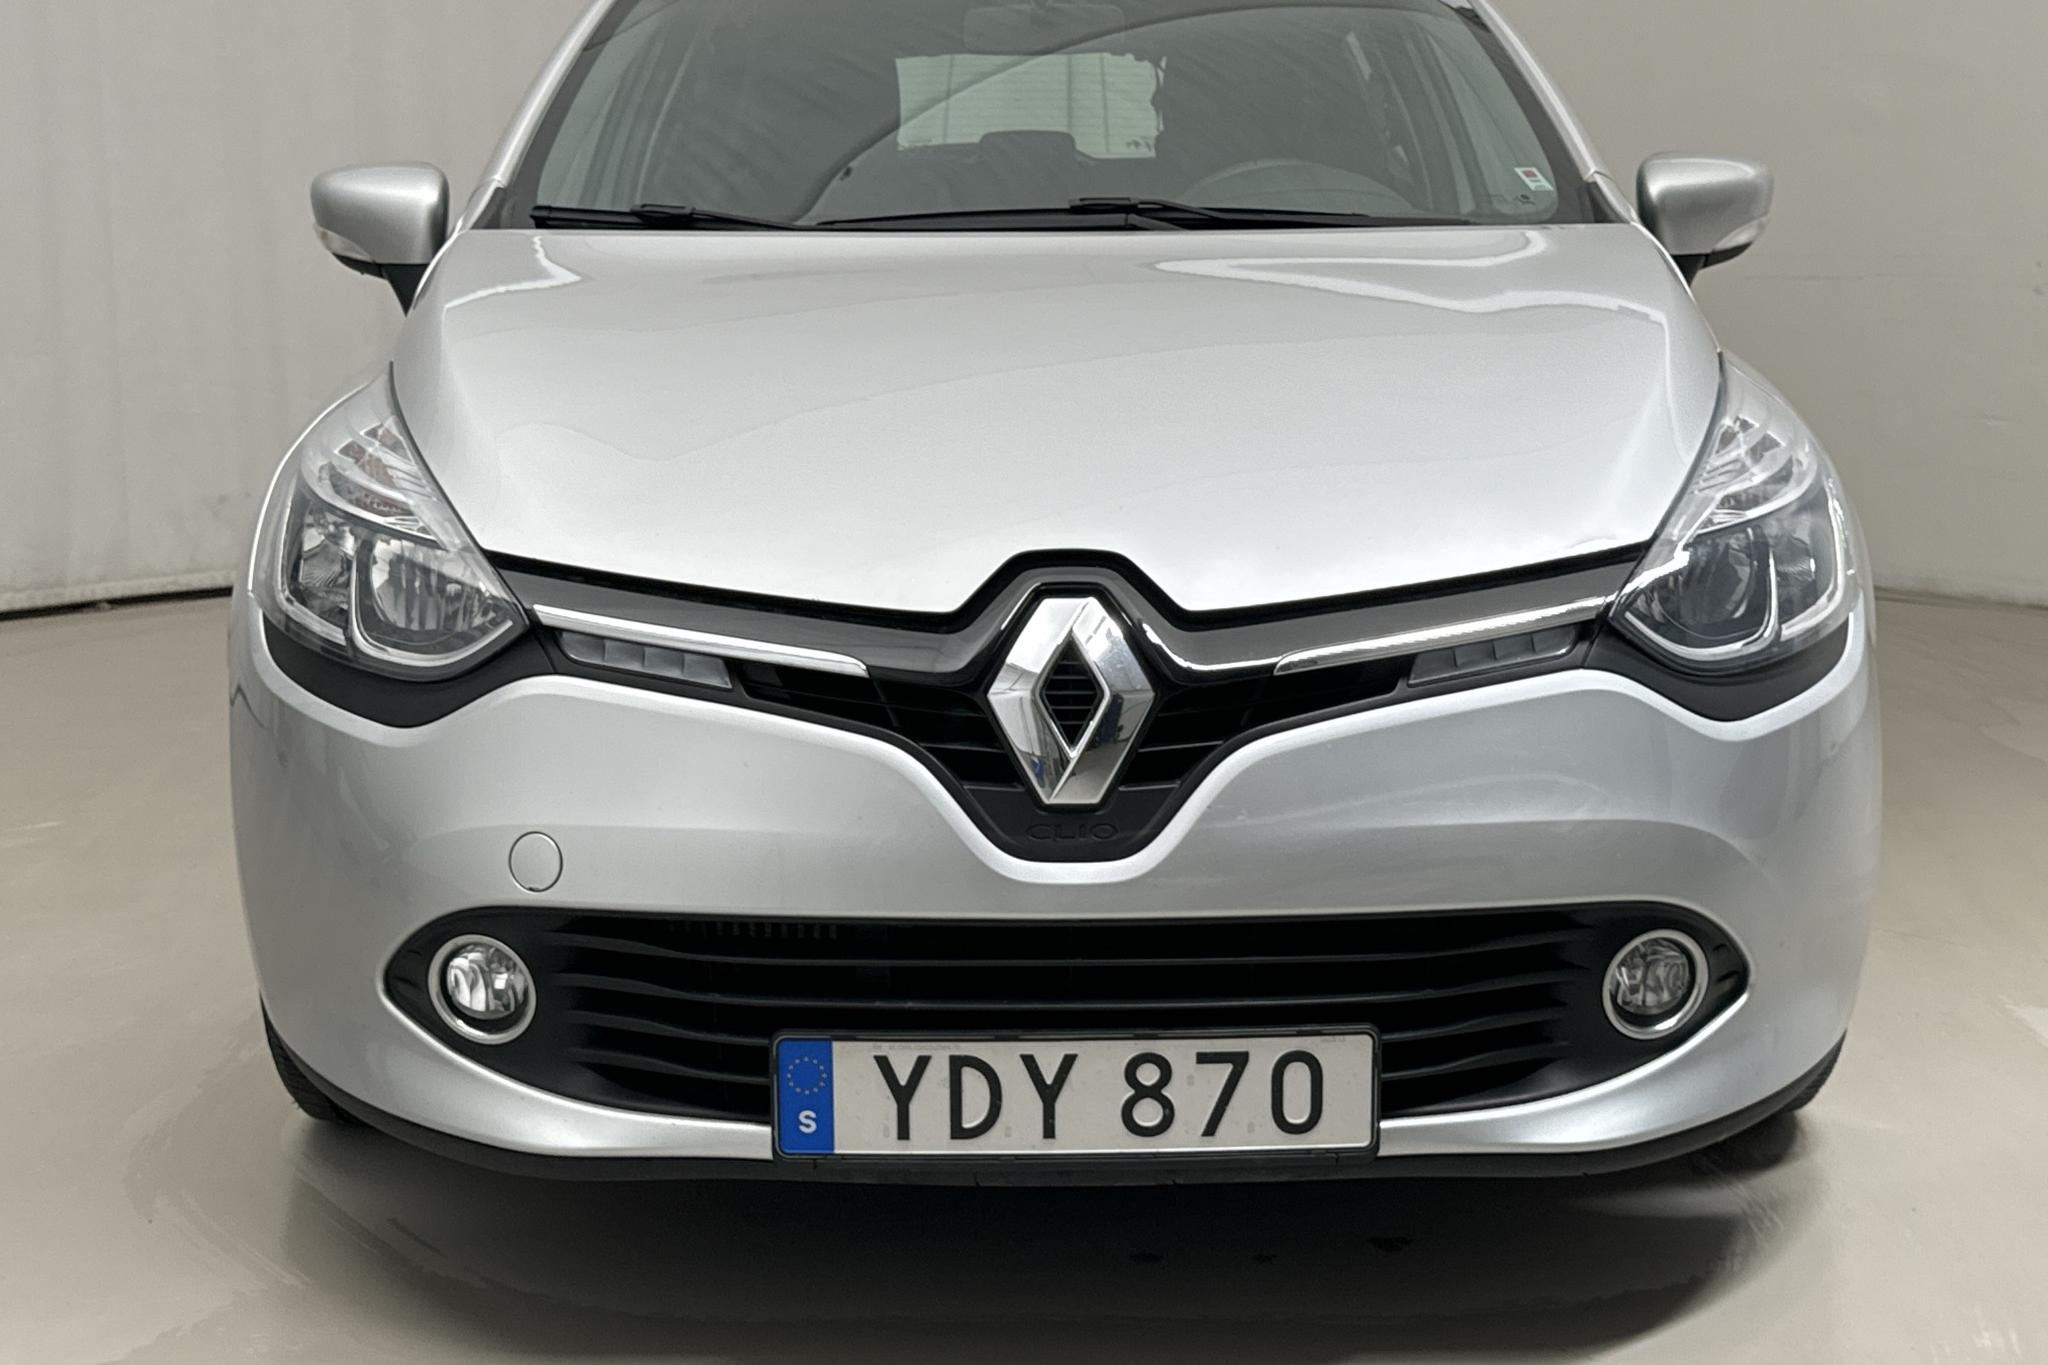 Renault Clio IV 0.9 TCe 90 5dr (90hk) - 71 210 km - Manual - silver - 2016